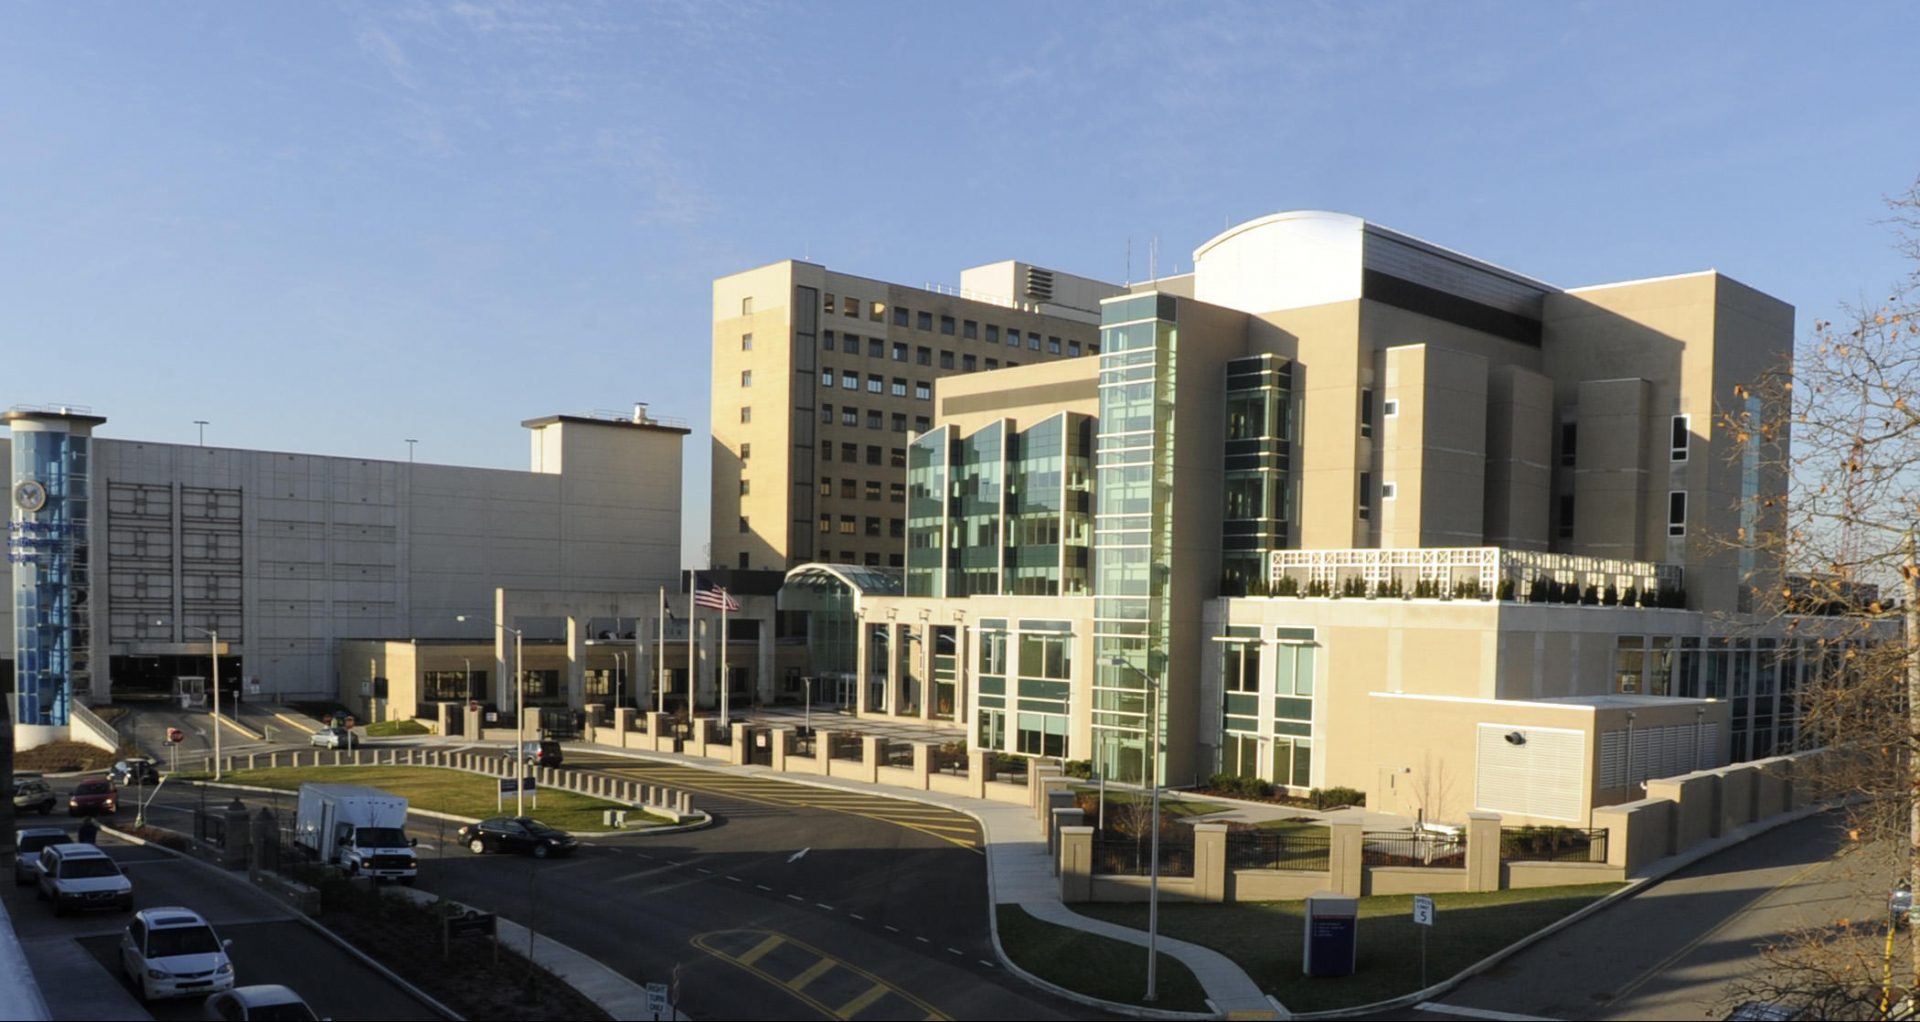 The Pittsburgh Office of Veterans Affairs operates through multiple sites across the region, including its Oakland campus pictured here.